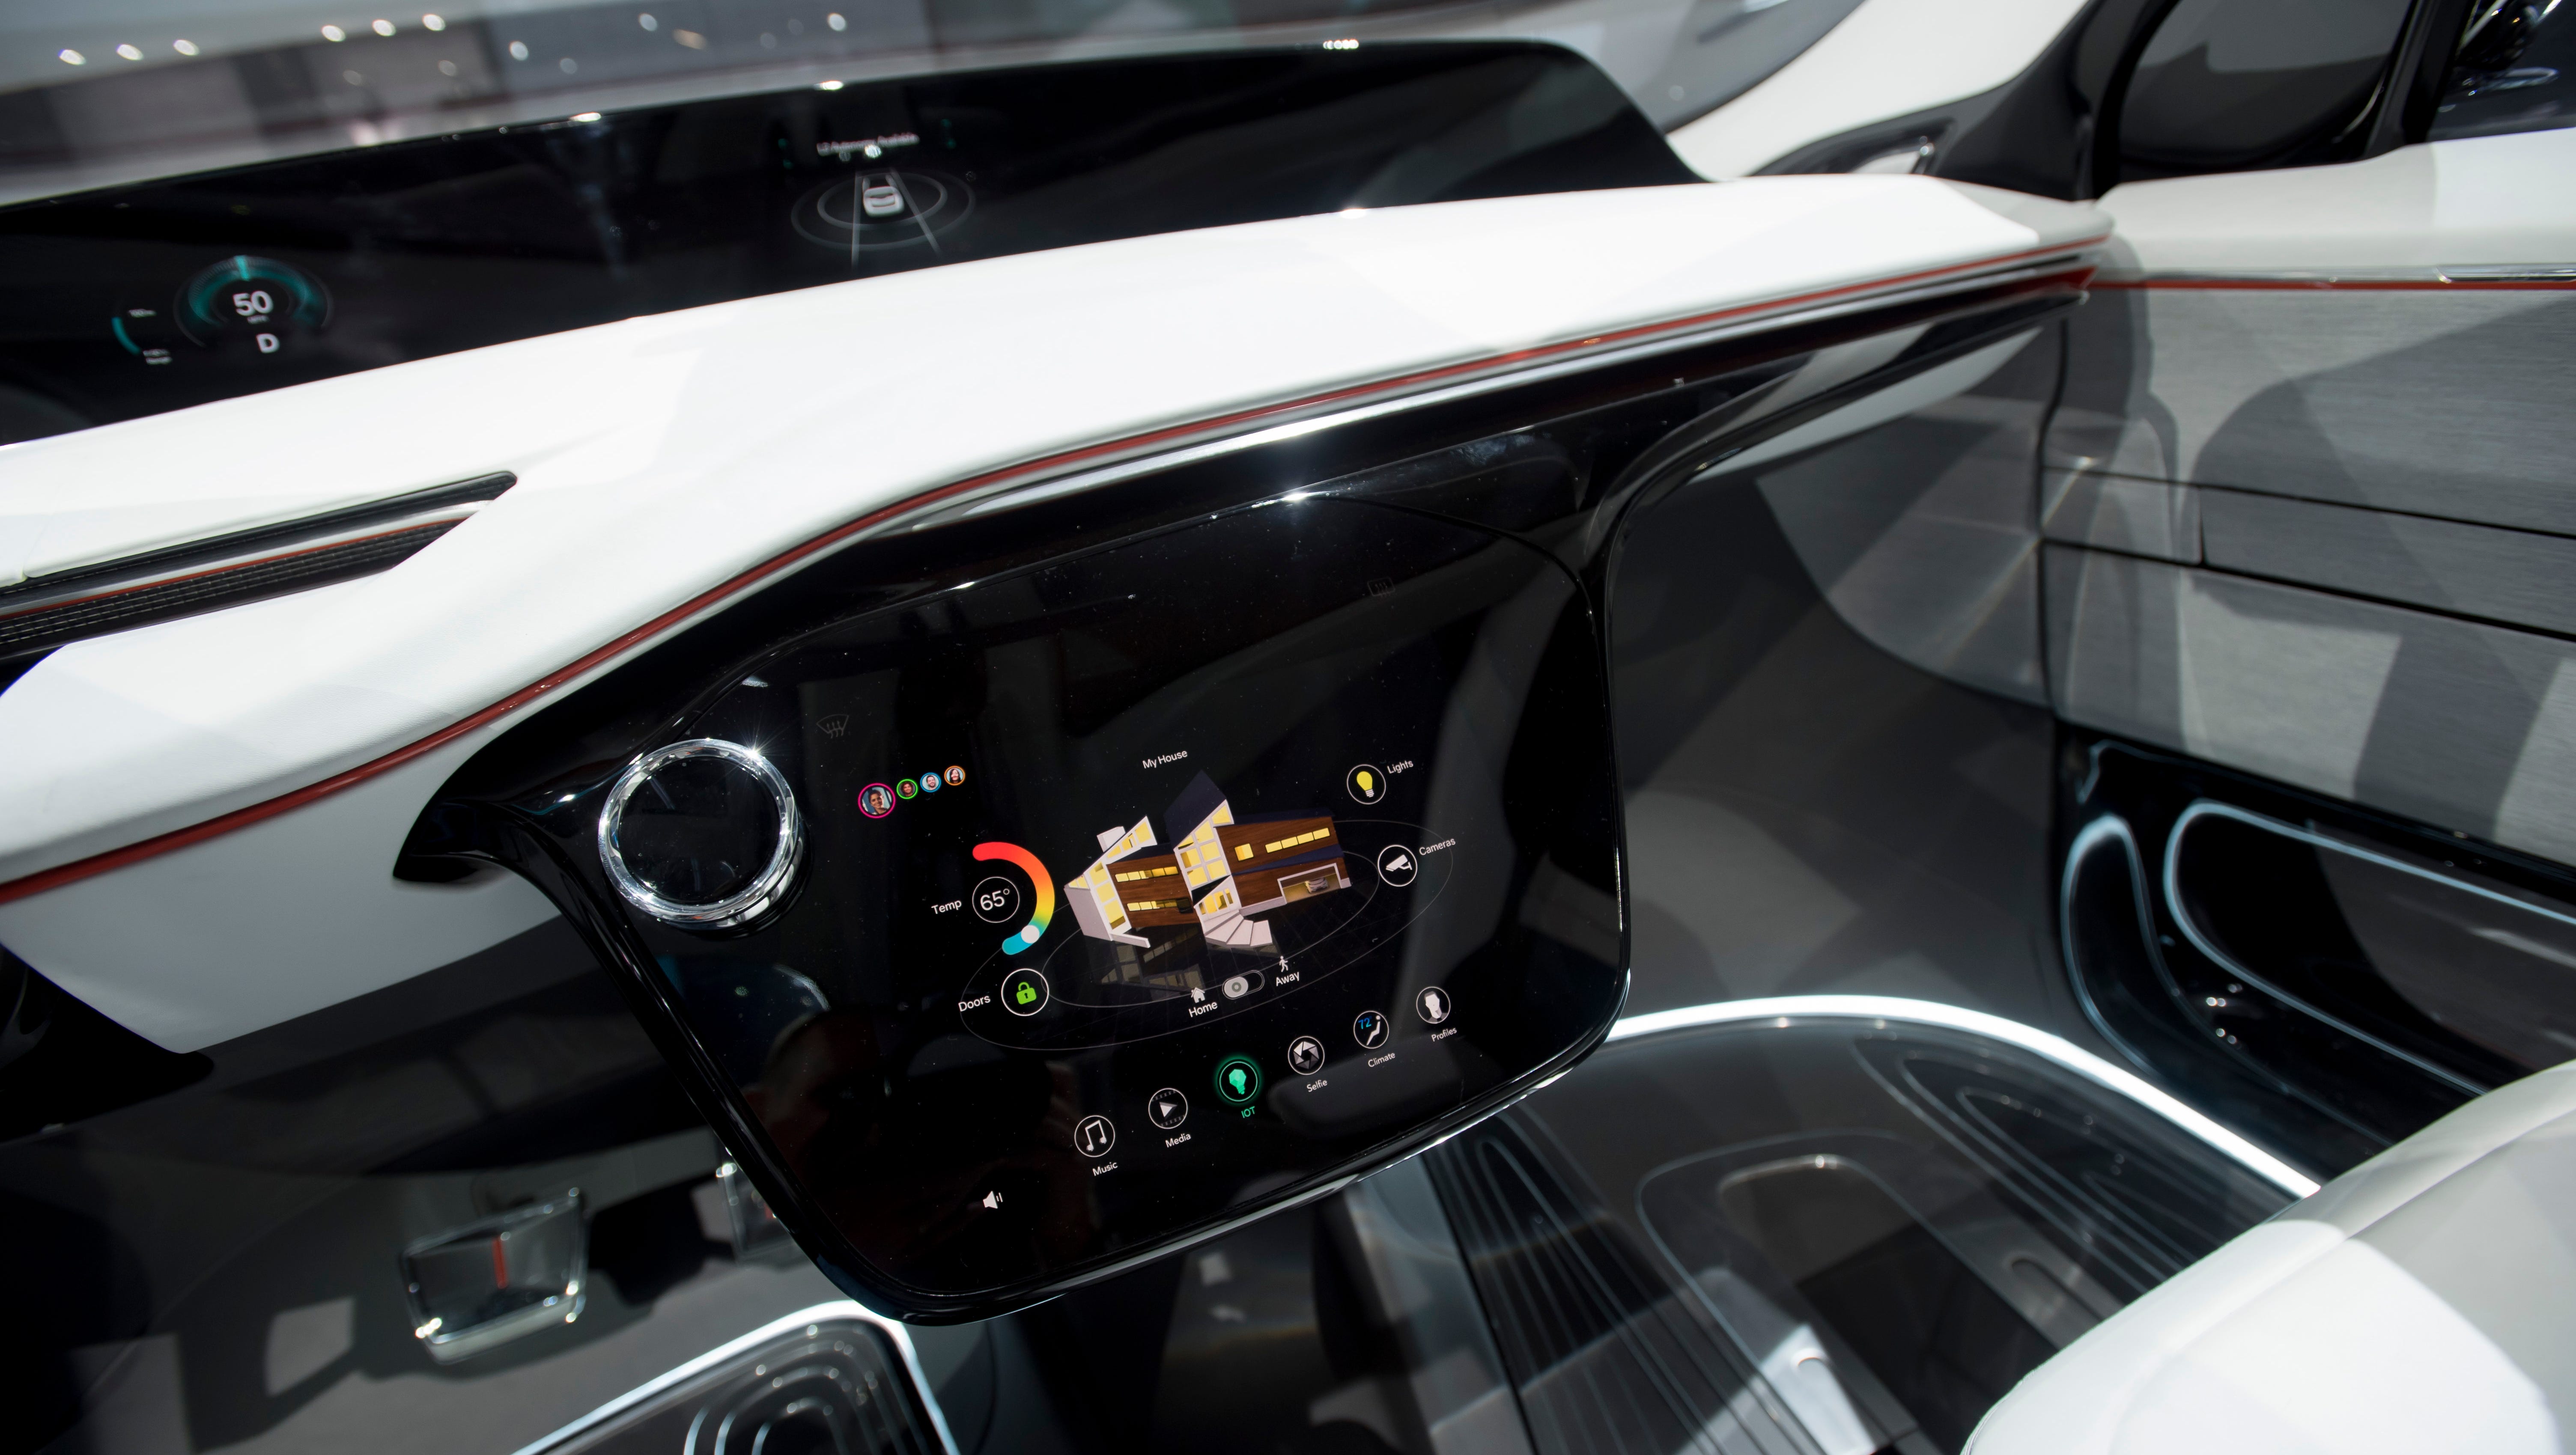 The Chrysler Portal concept is equipped with internet- and cloud-based applications.